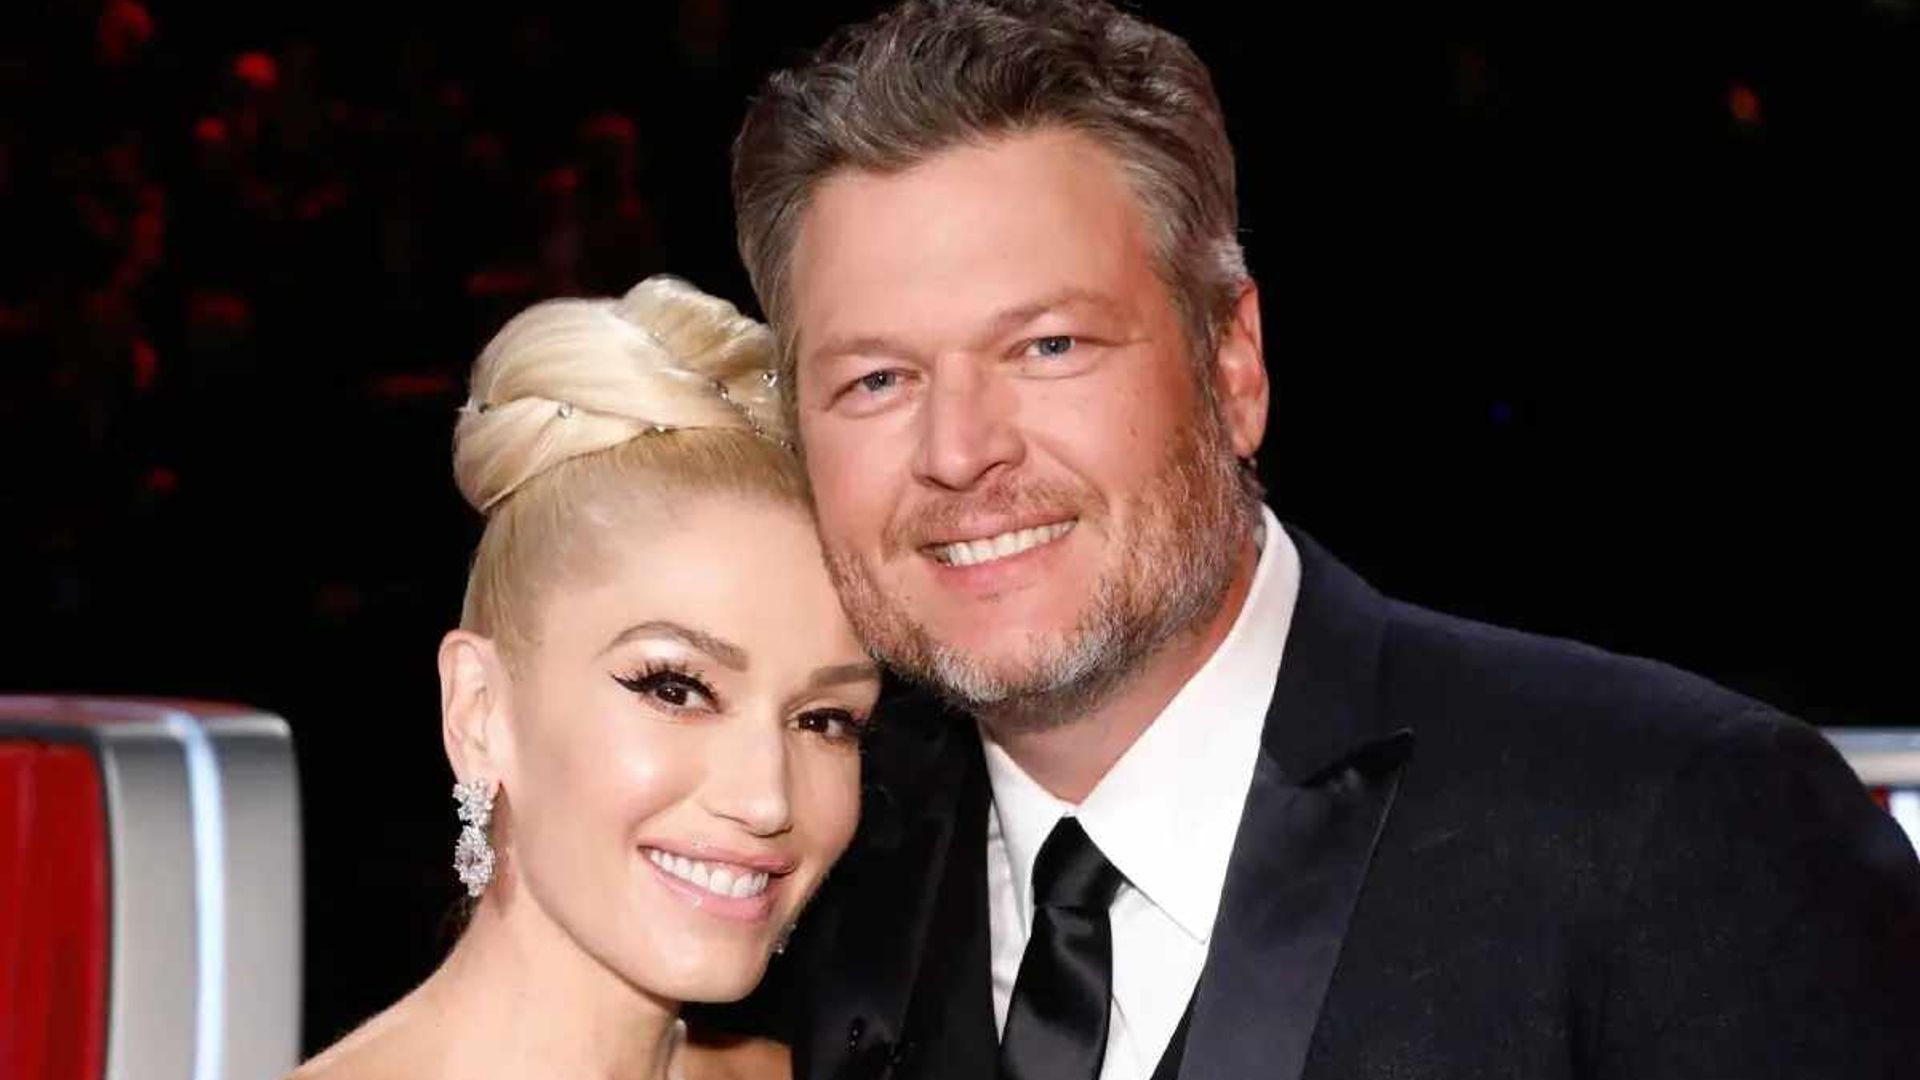 Gwen Stefani and Blake Shelton make unexpected discovery - 'never in my wildest dreams or prayers'